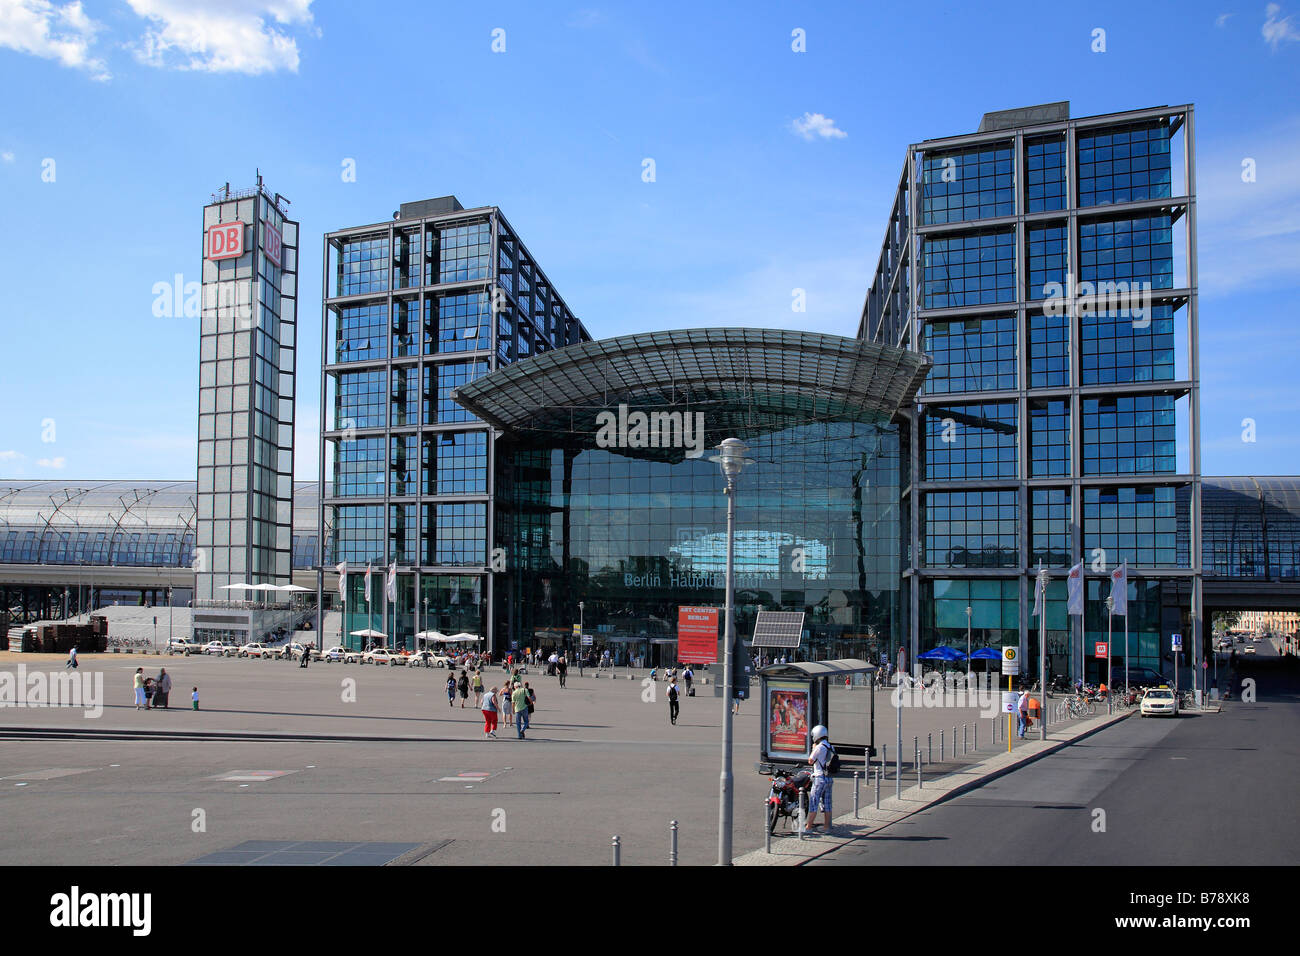 Berliner Hauptbahnhof or Berlin Central Train Station, southern entrance, Bezirk Mitte or Central Region, Berlin, Germany, Euro Stock Photo